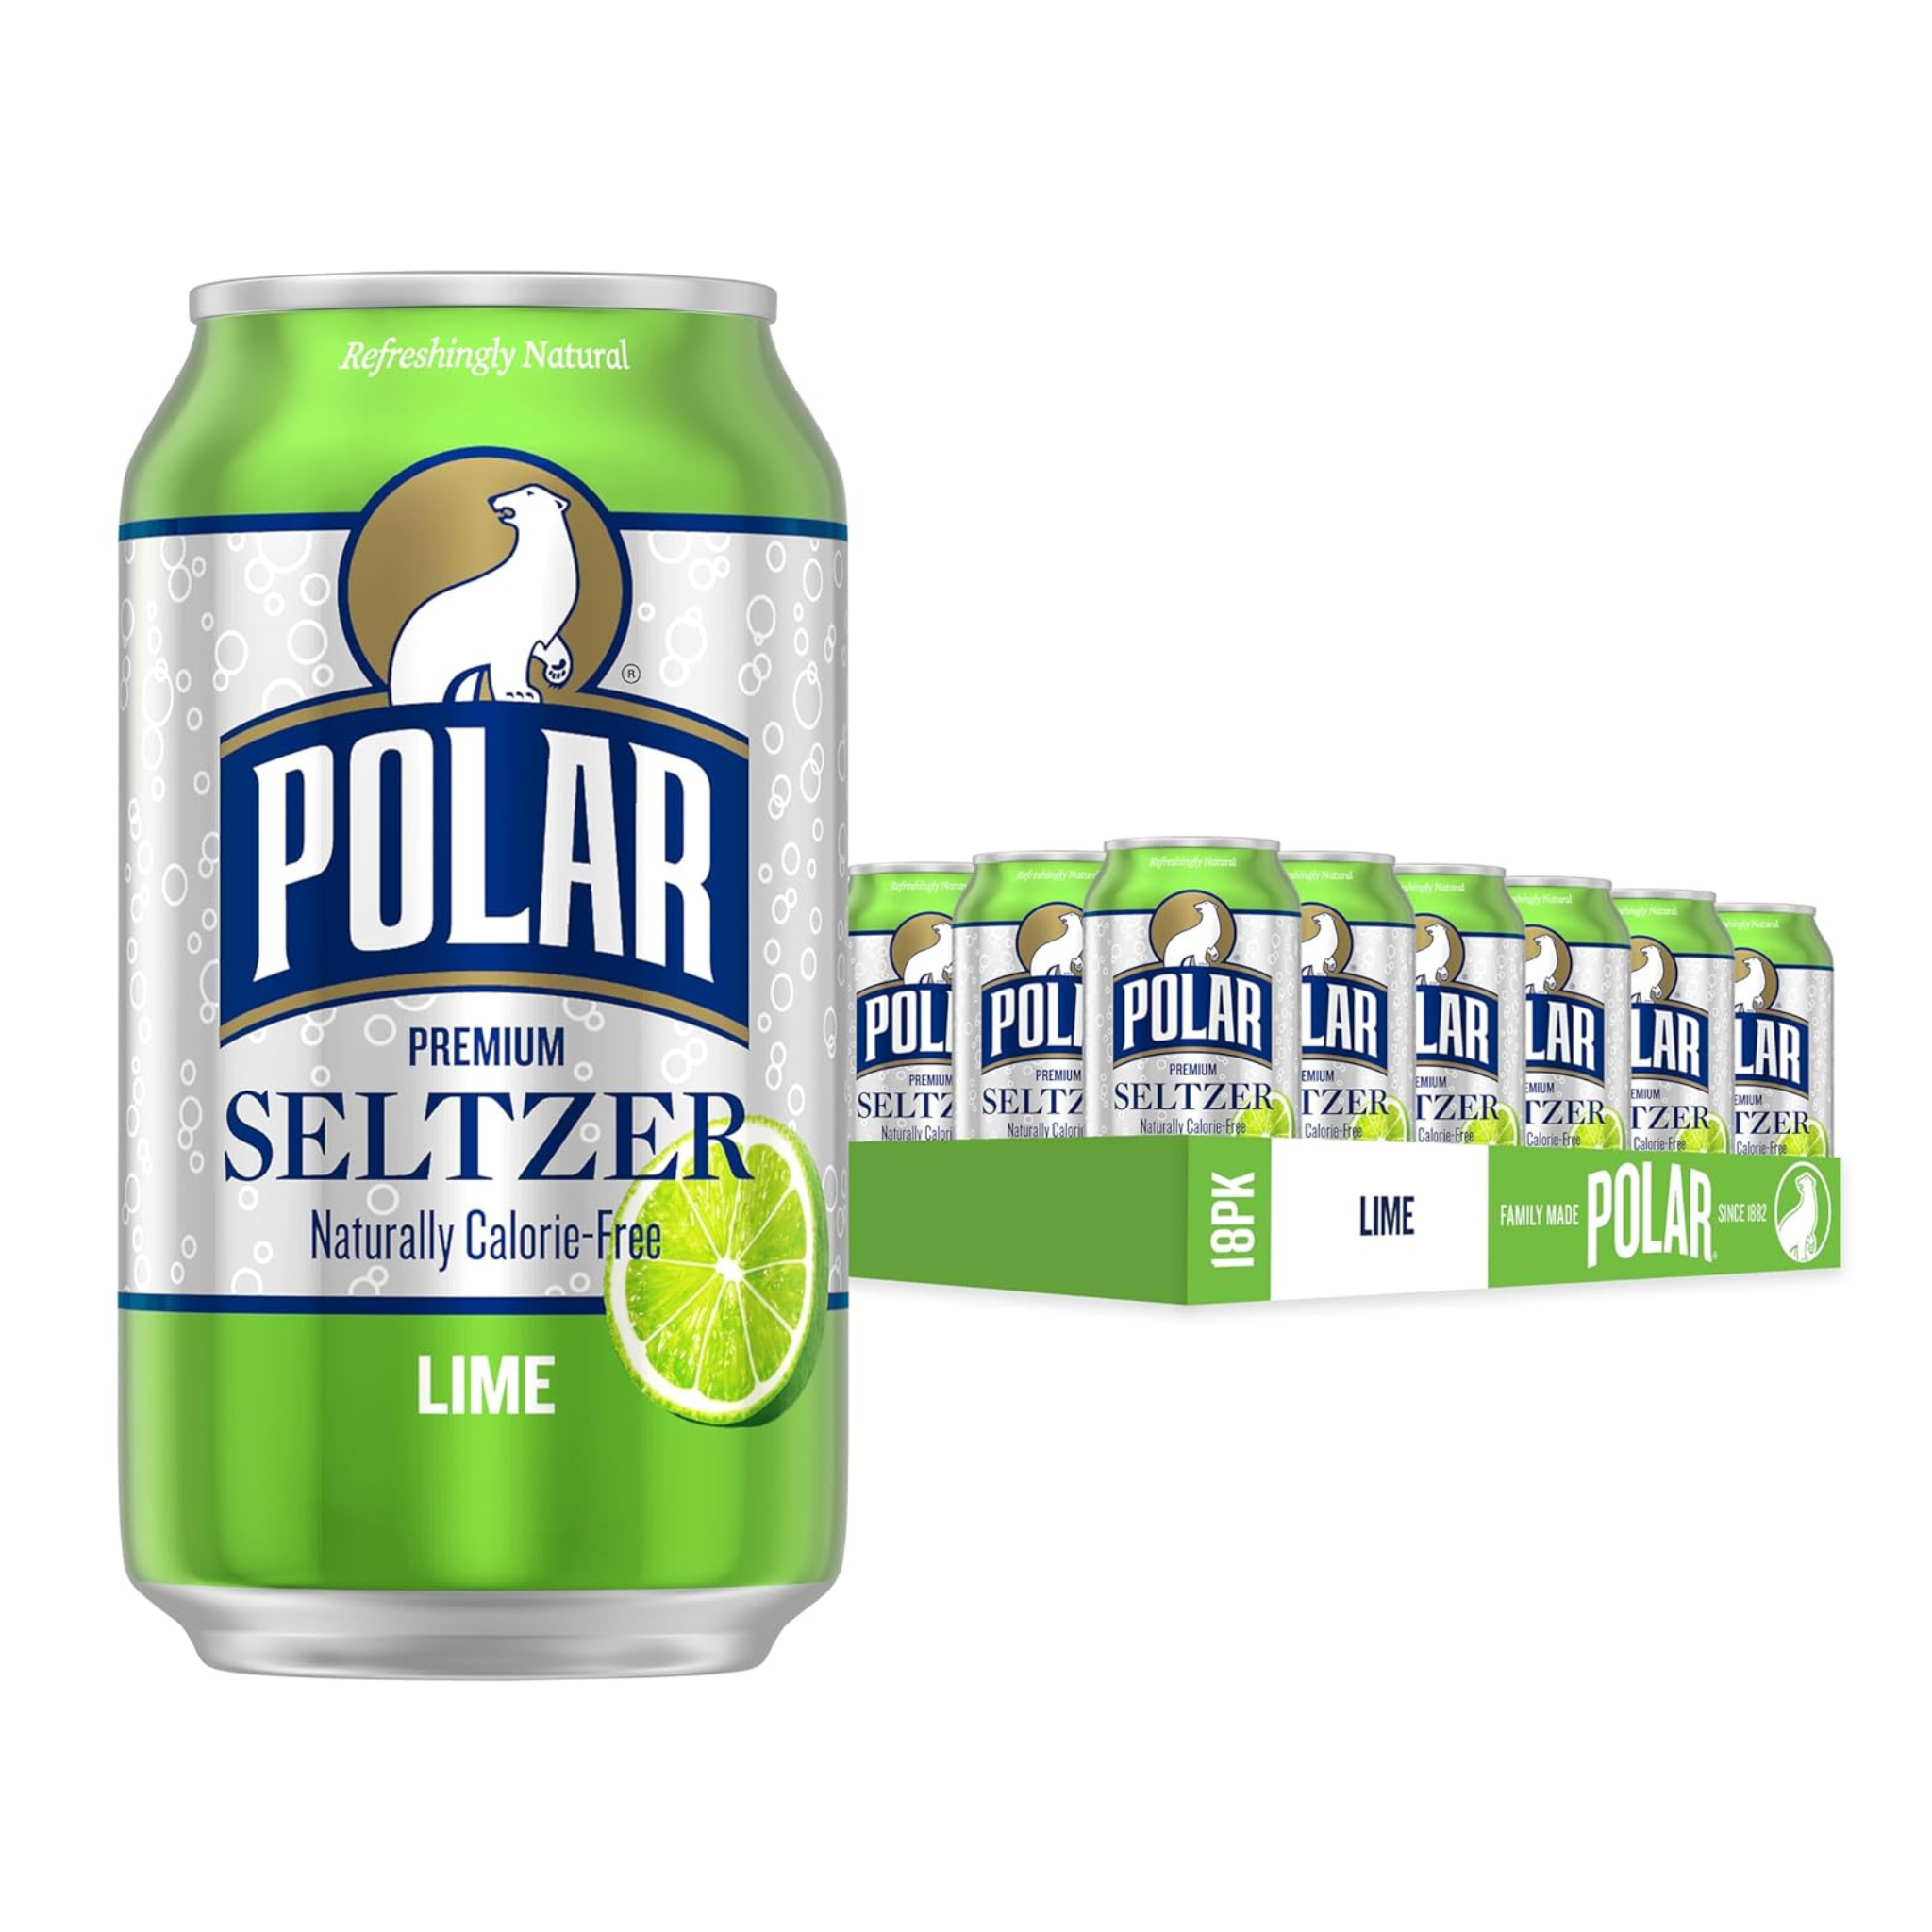 18 Cans of Polar Seltzer Water Lime